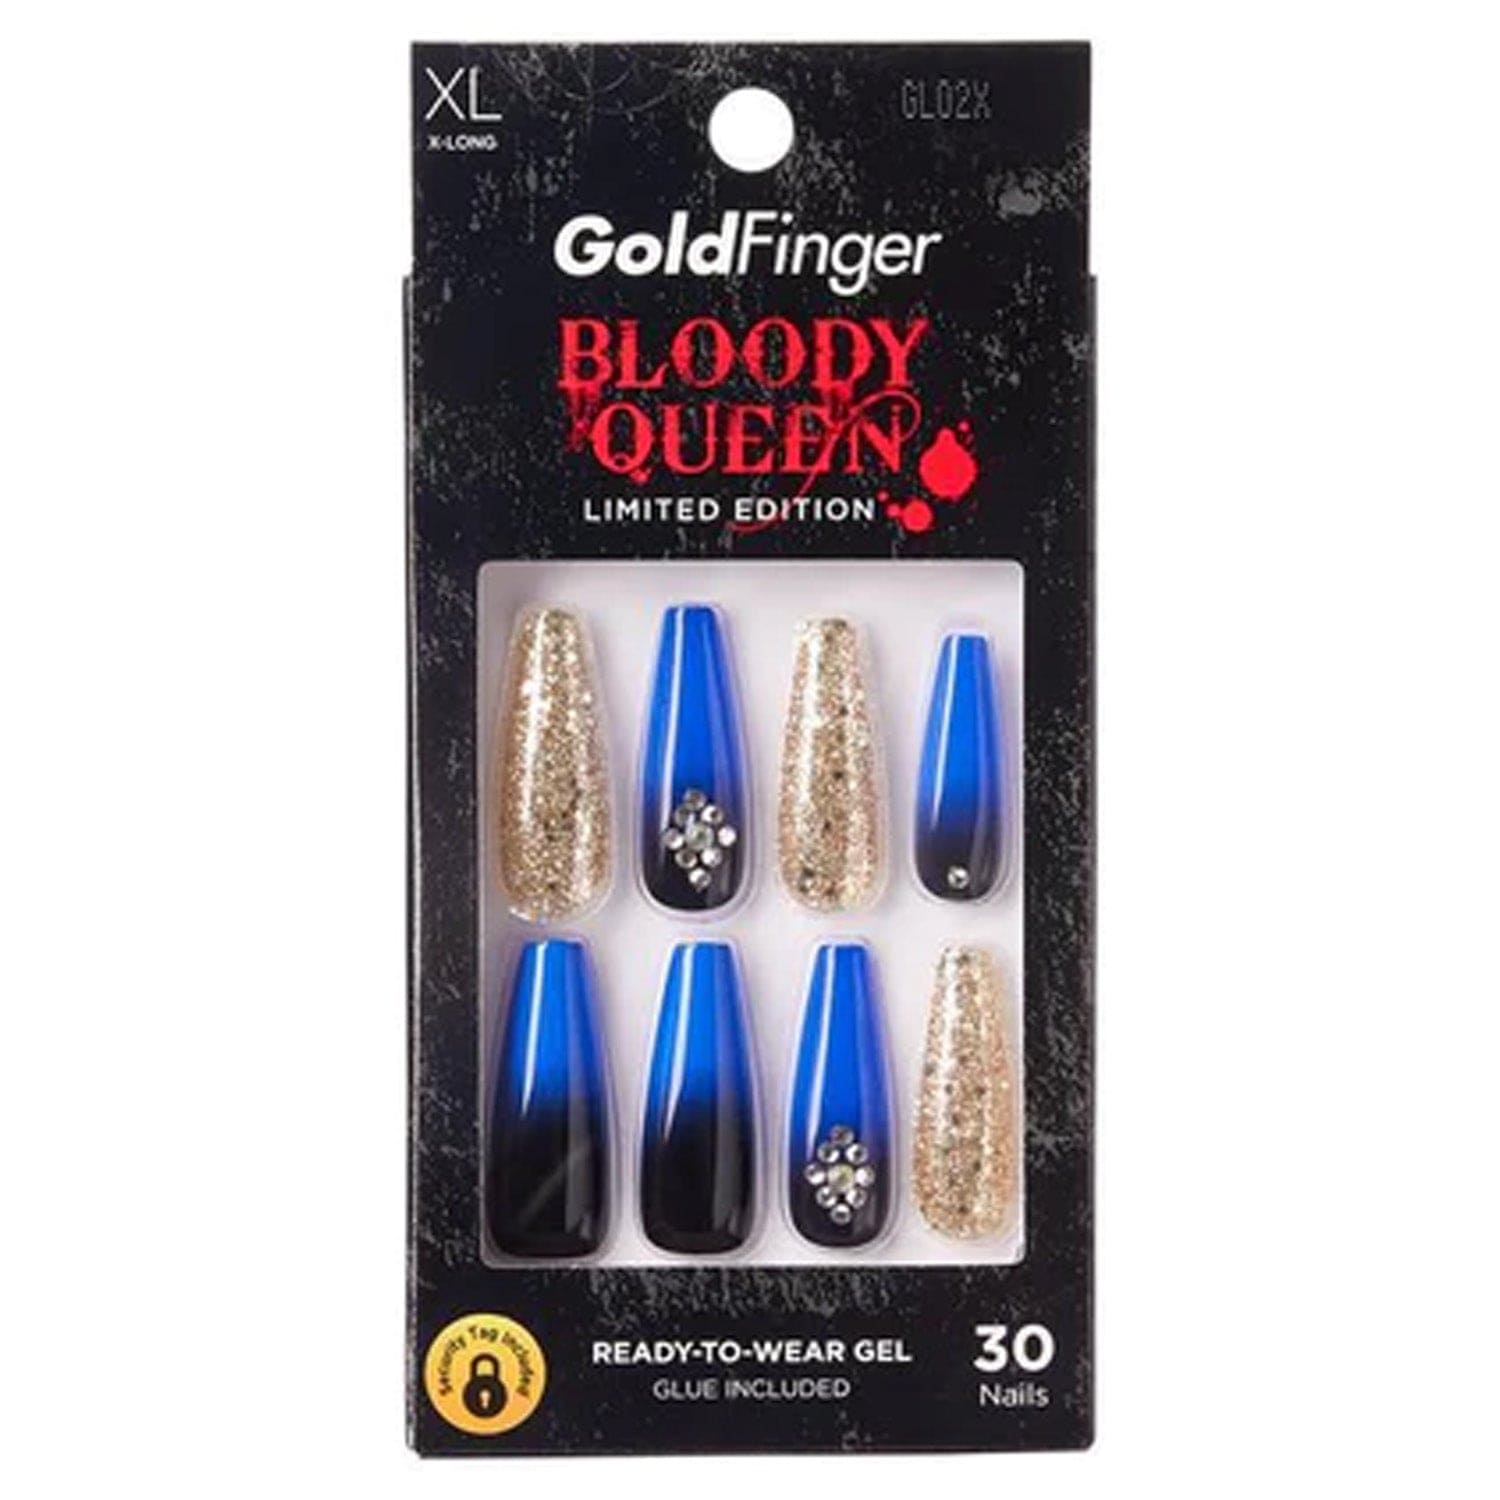 GOLDFINGER BLOODY QUEEN NAILS WITCHCRAFT #GD02X